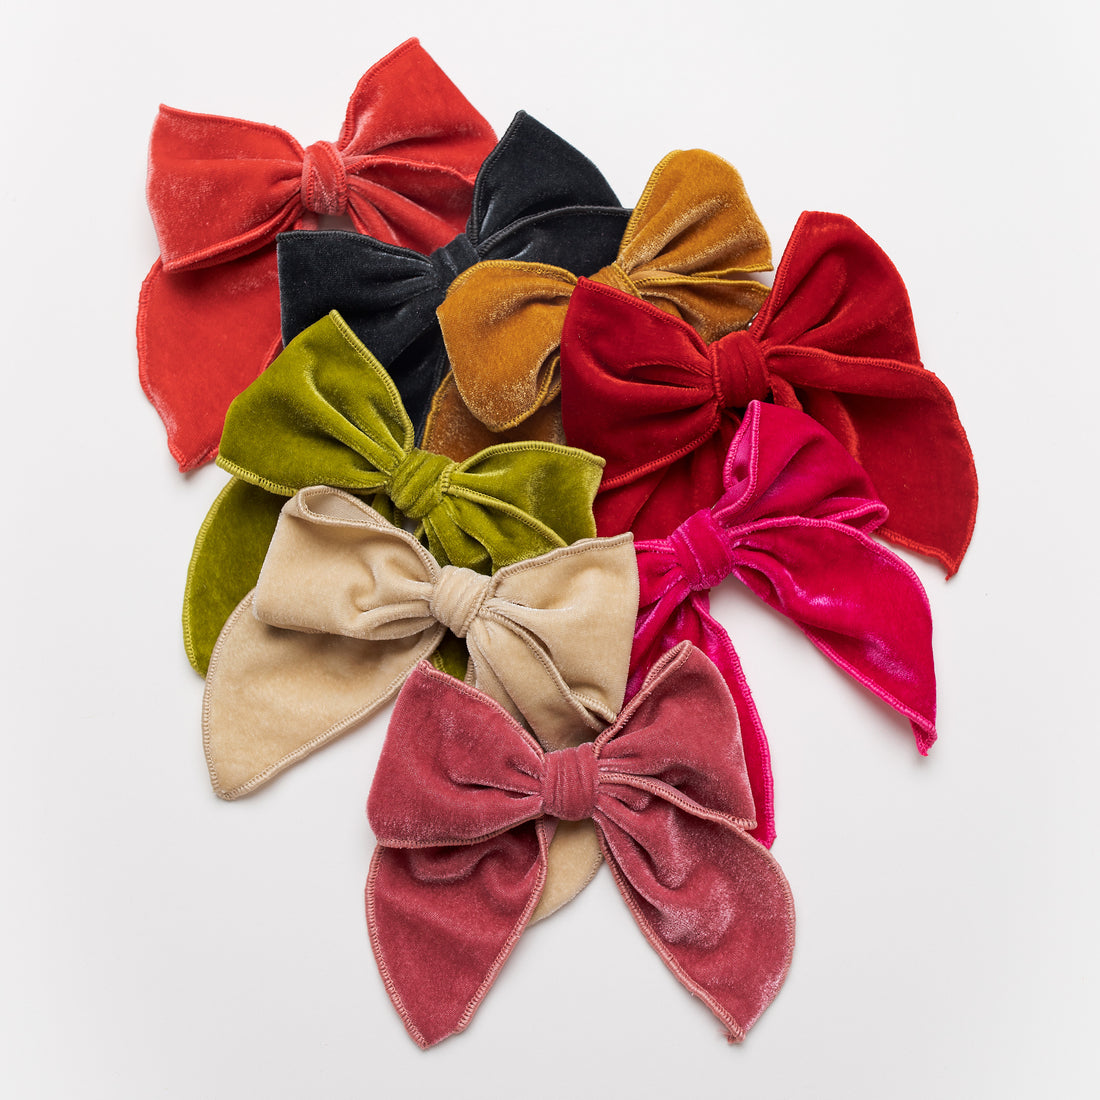 FABLE VELVET BOWS 10 COLORS – Think Pink Bows